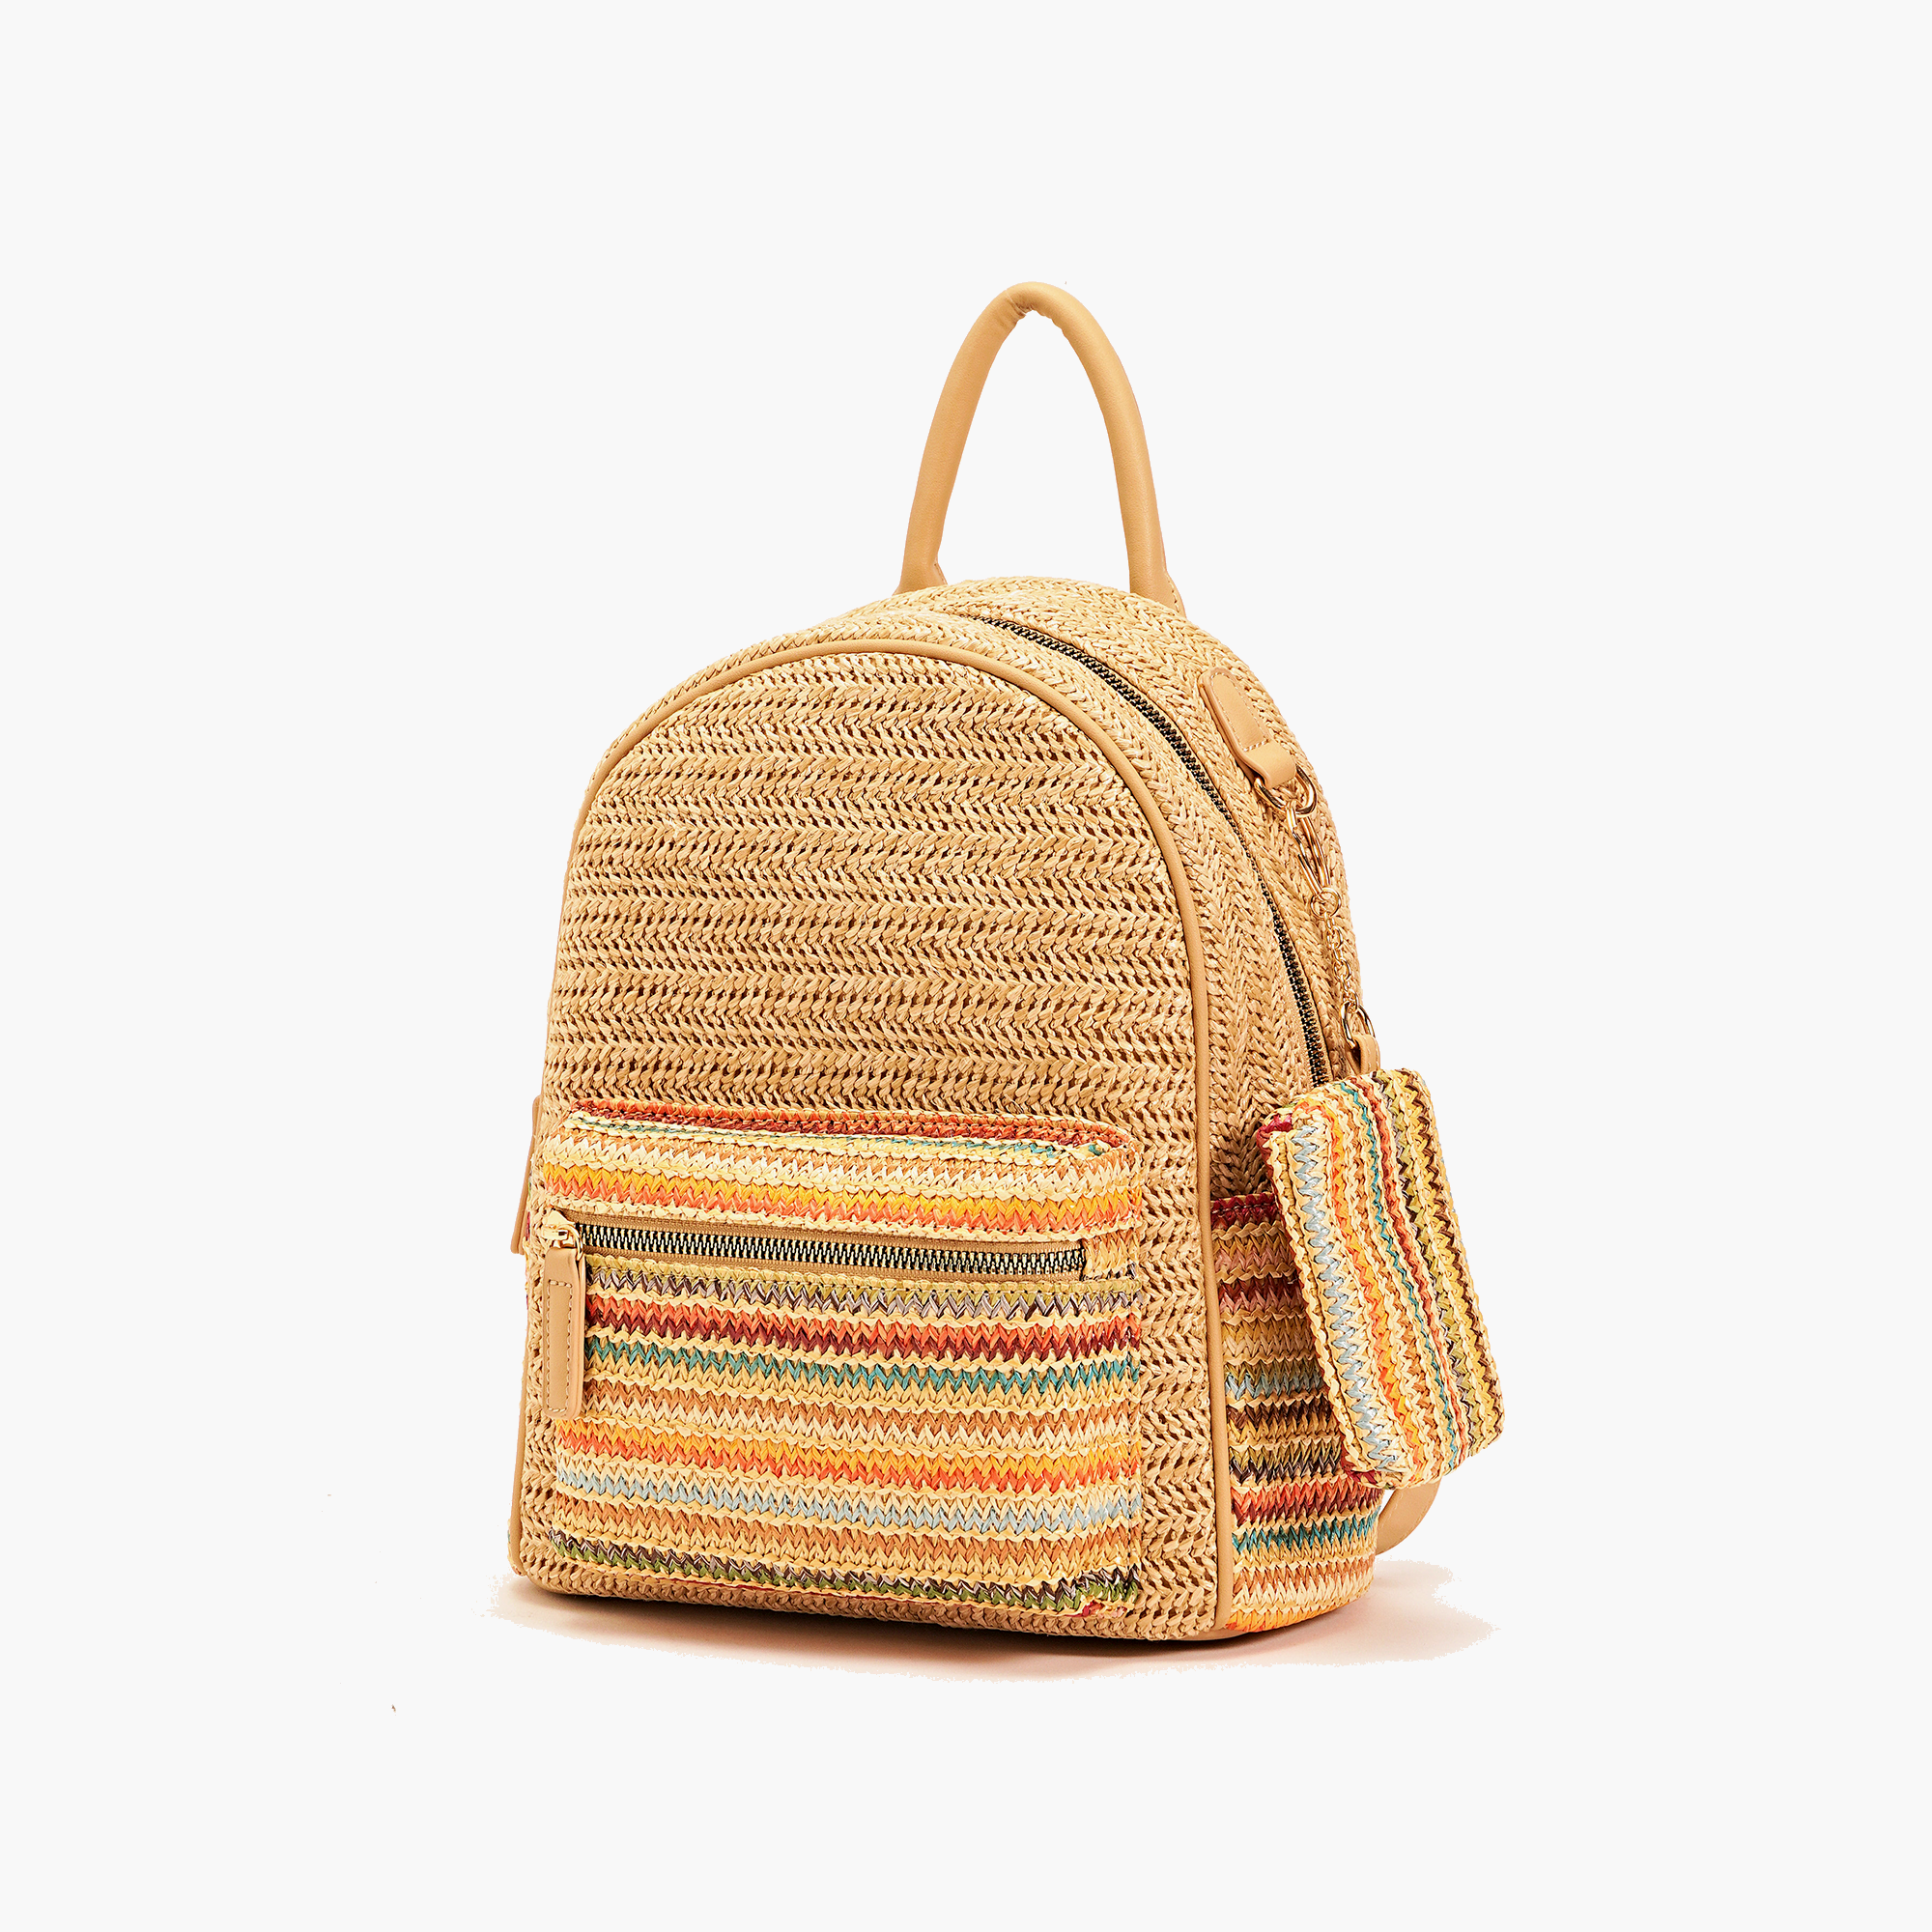 Woven Straw Backpack – Charming Charlie